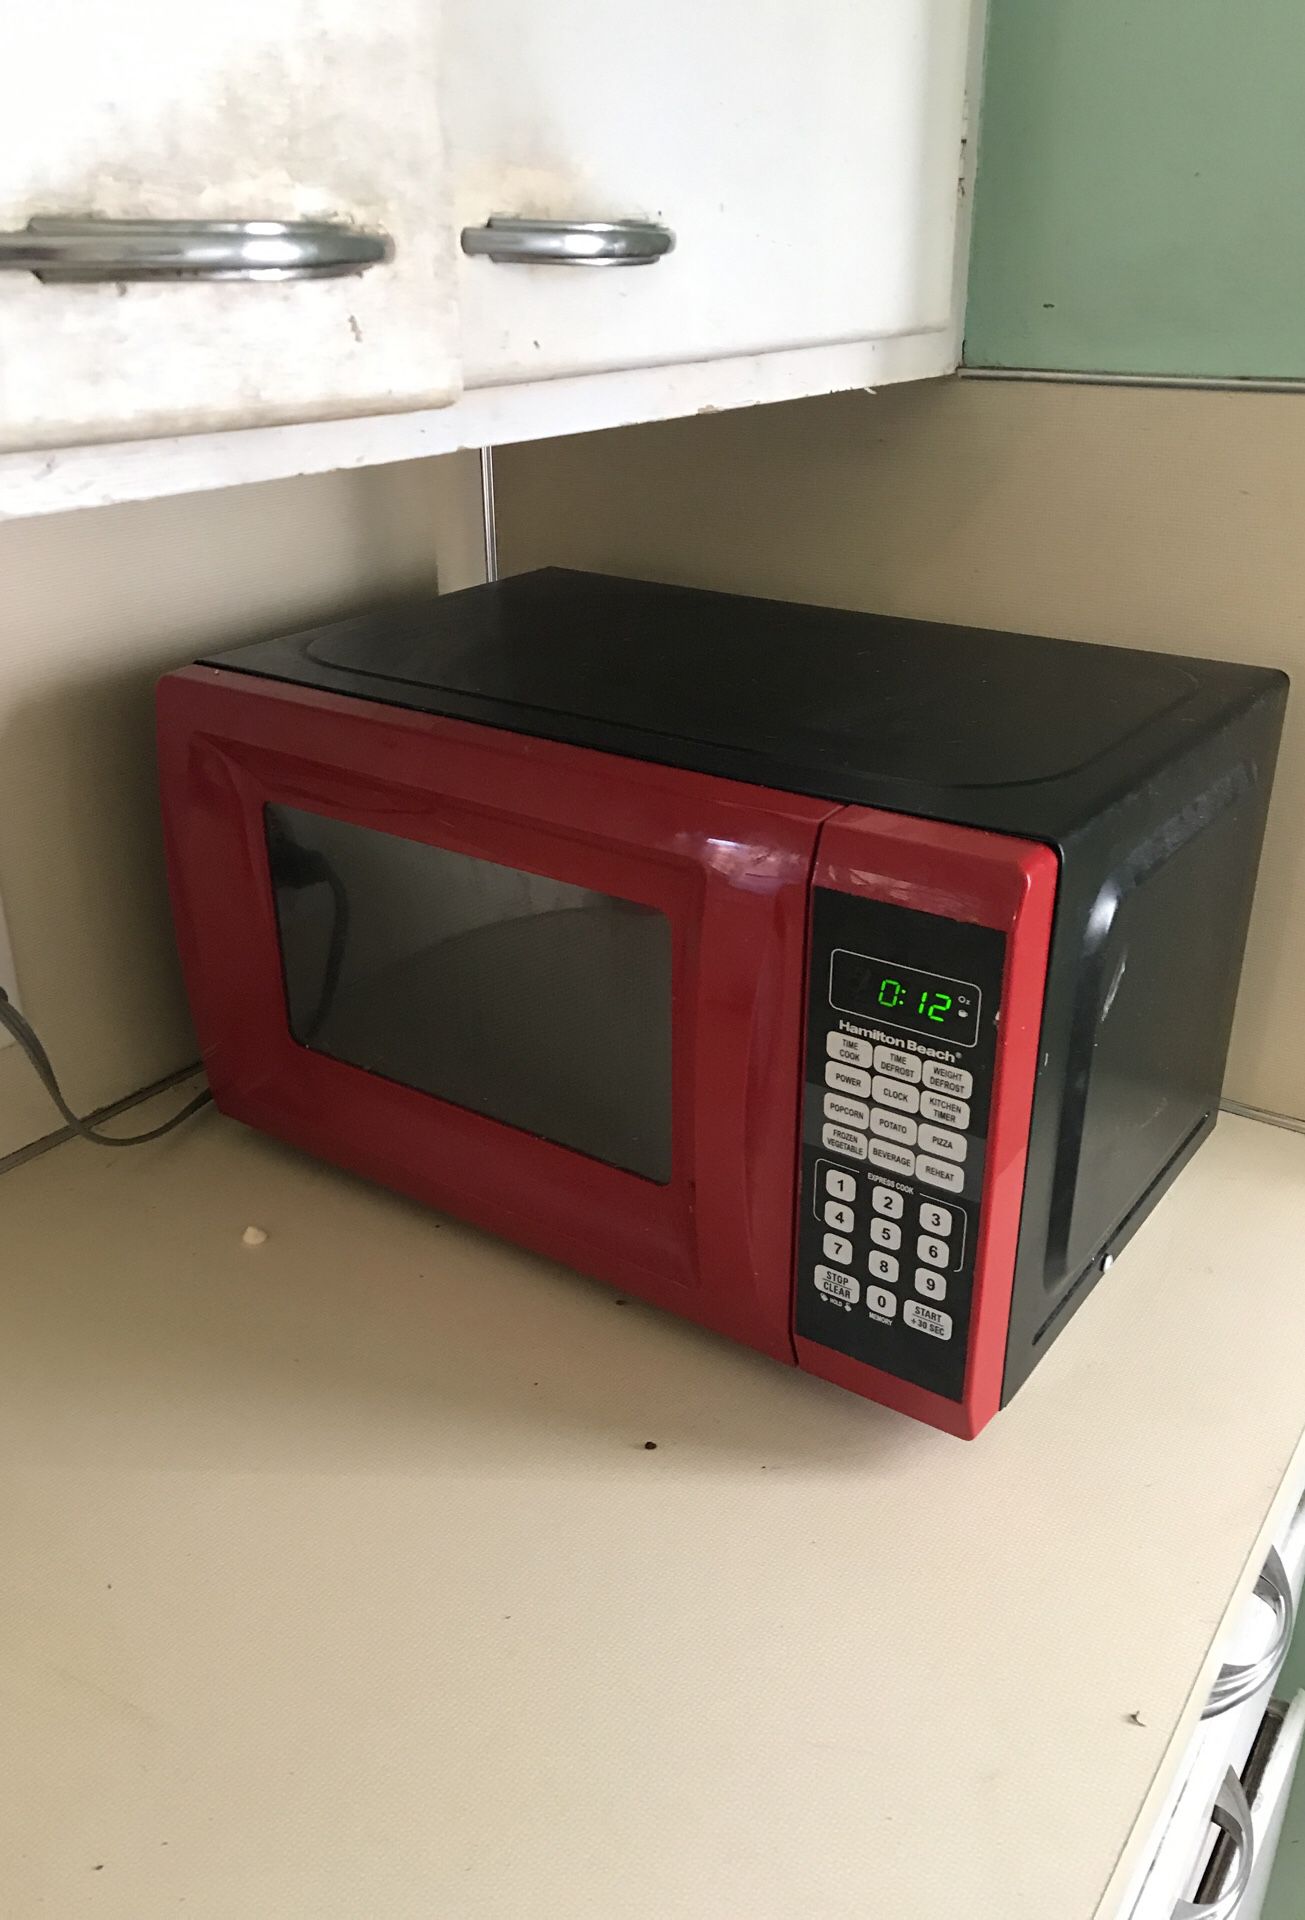 Microwave works great!